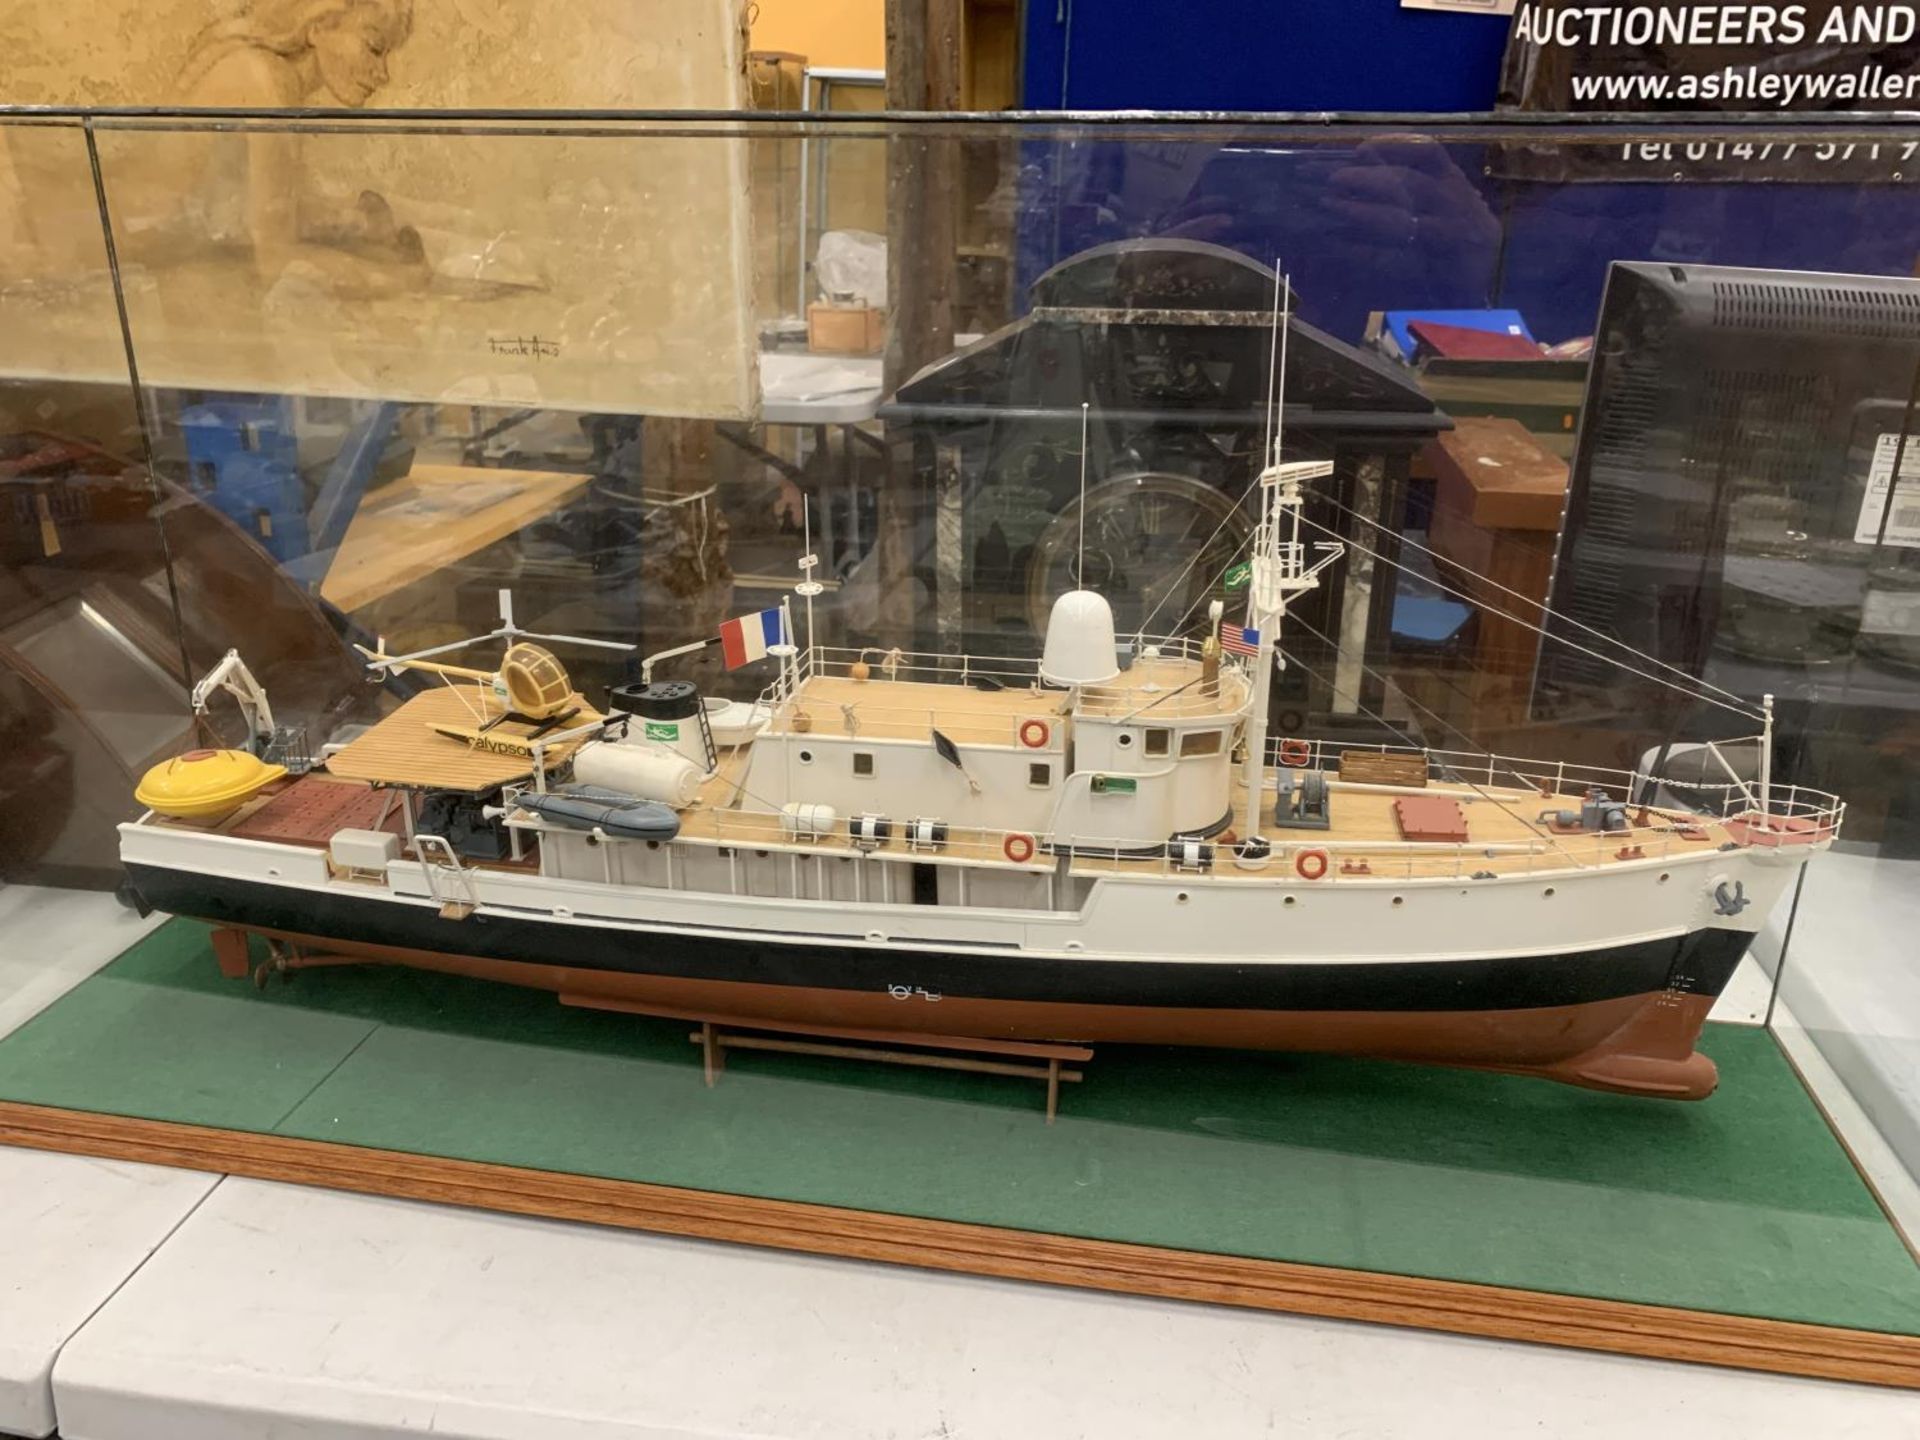 A LARGE MODEL OF A BOAT WITH HELICOPTER IN A GLASS CASE - Image 2 of 5